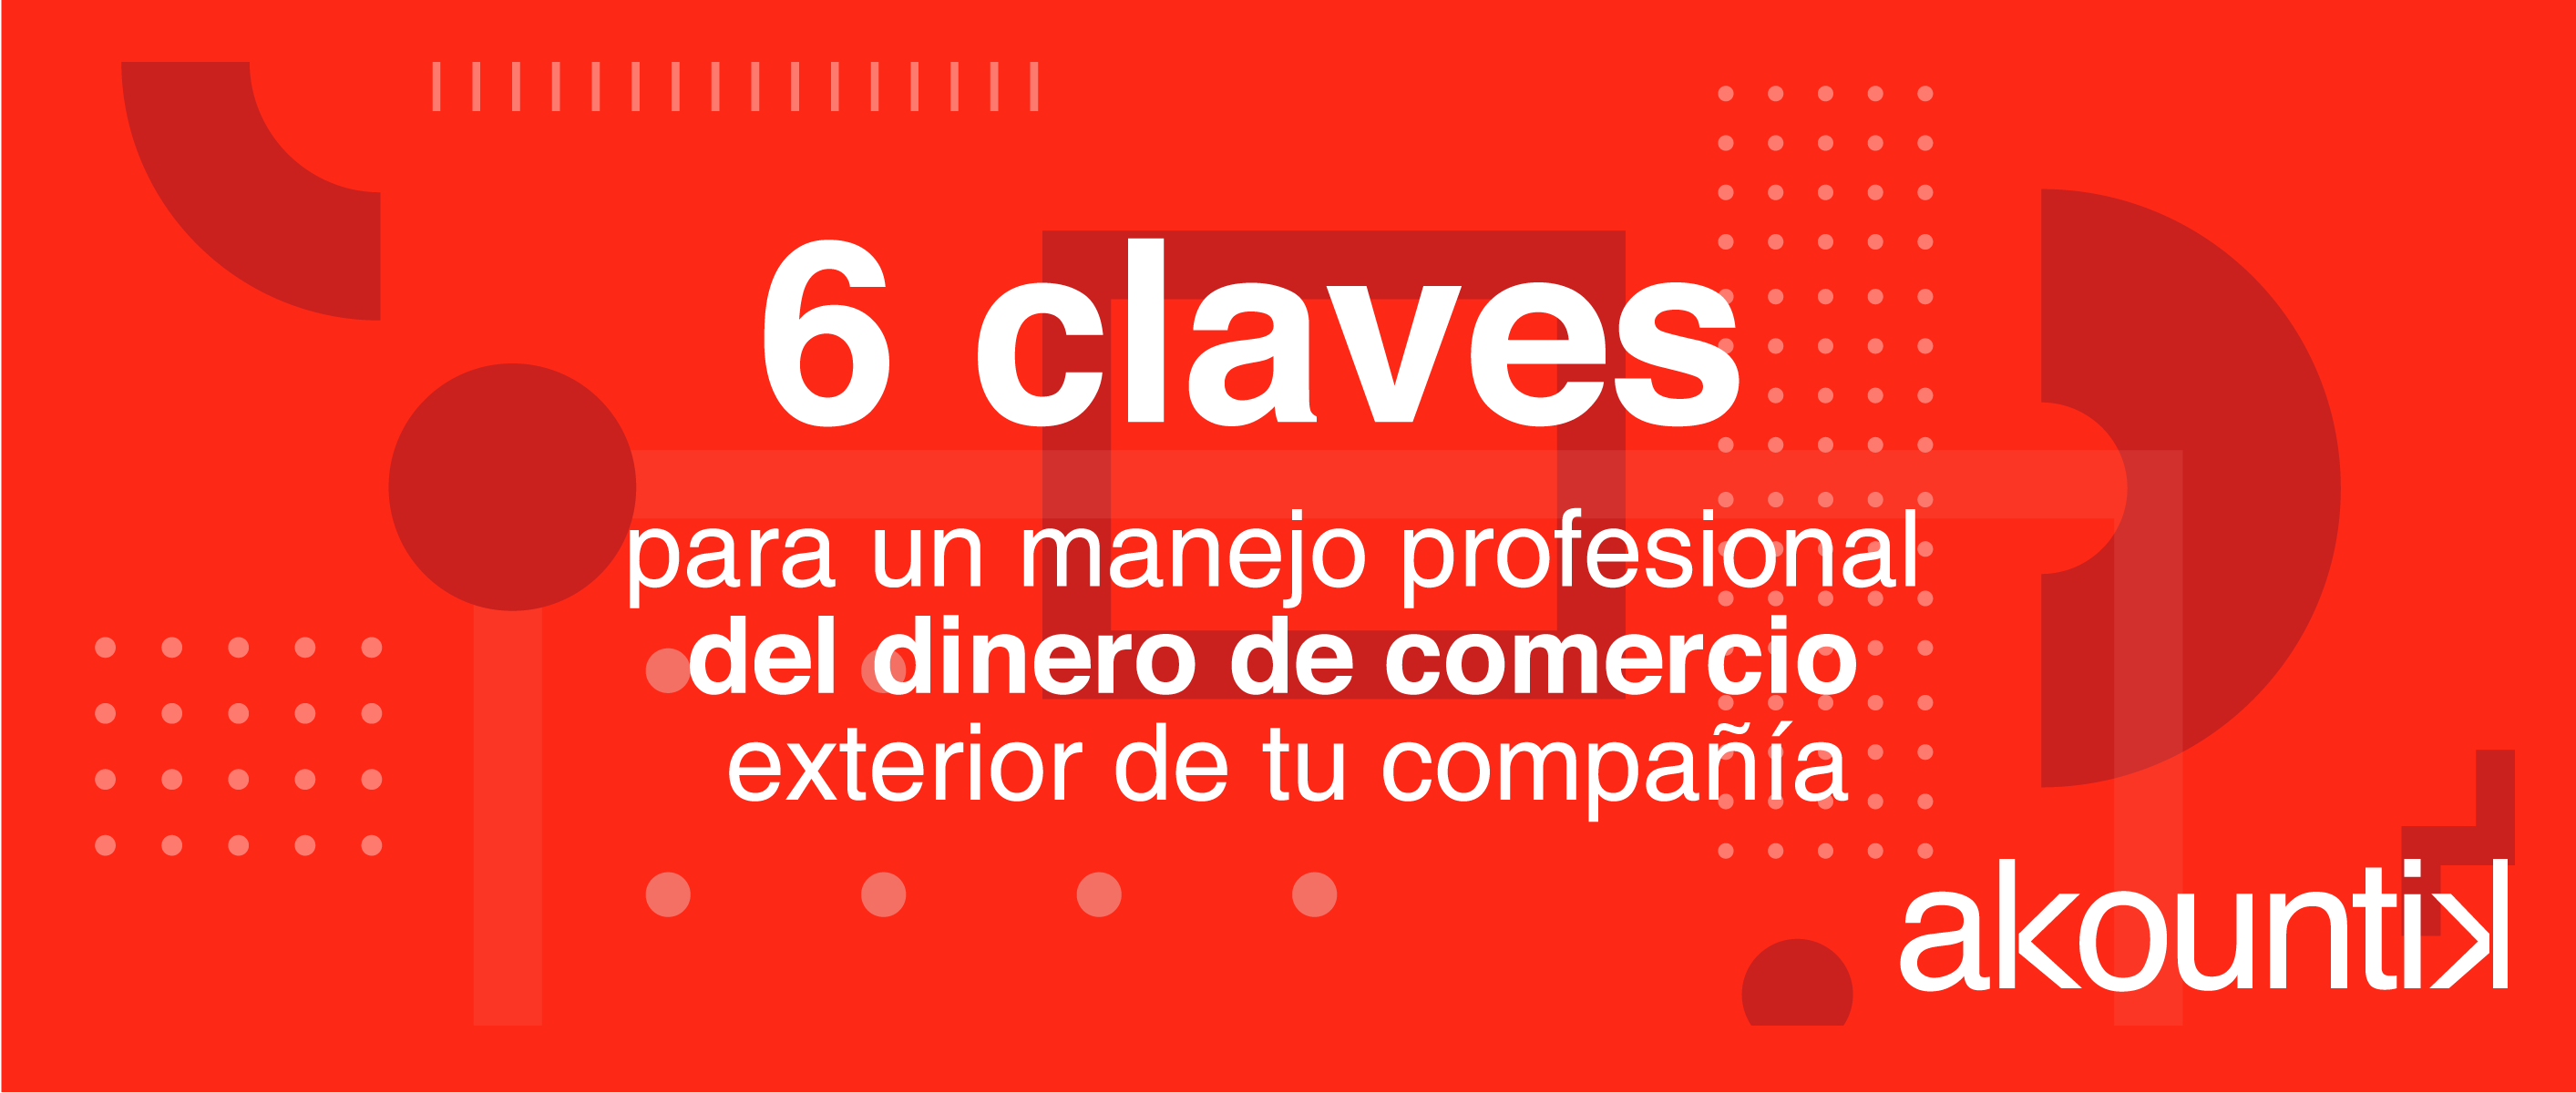 6 claves